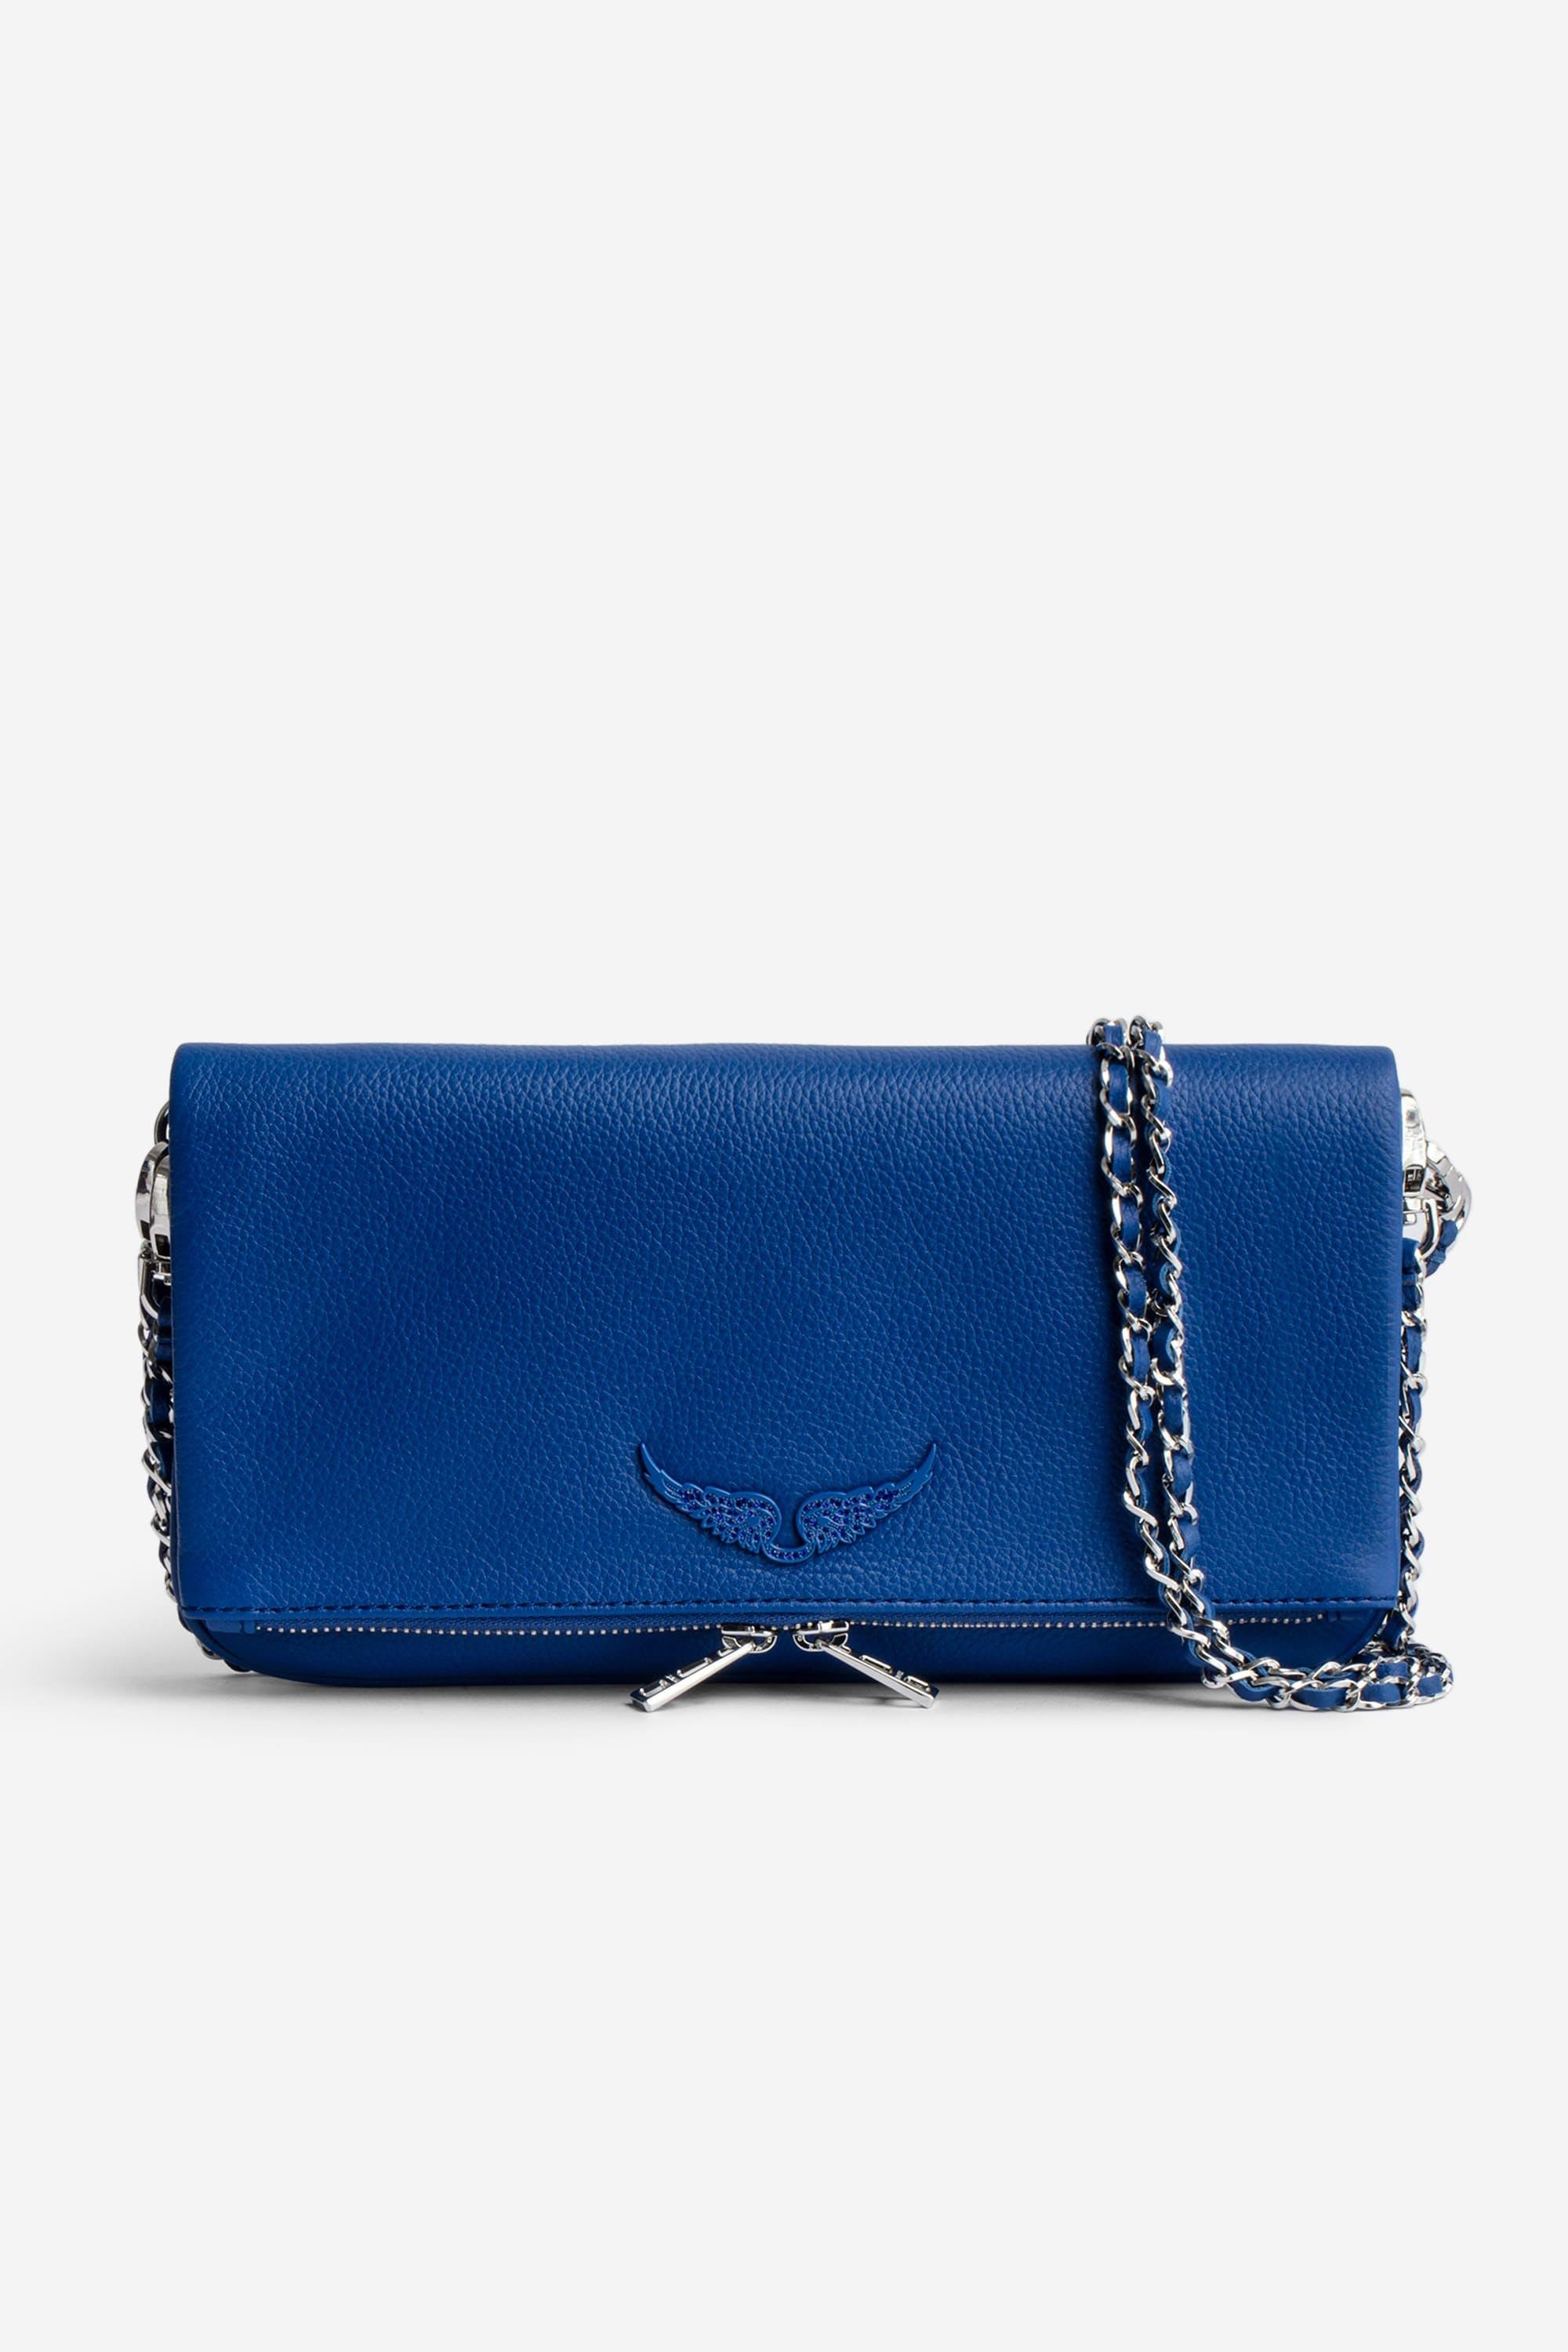 Zadig & Voltaire Rock Savage Leather Clutch Bag in Blue